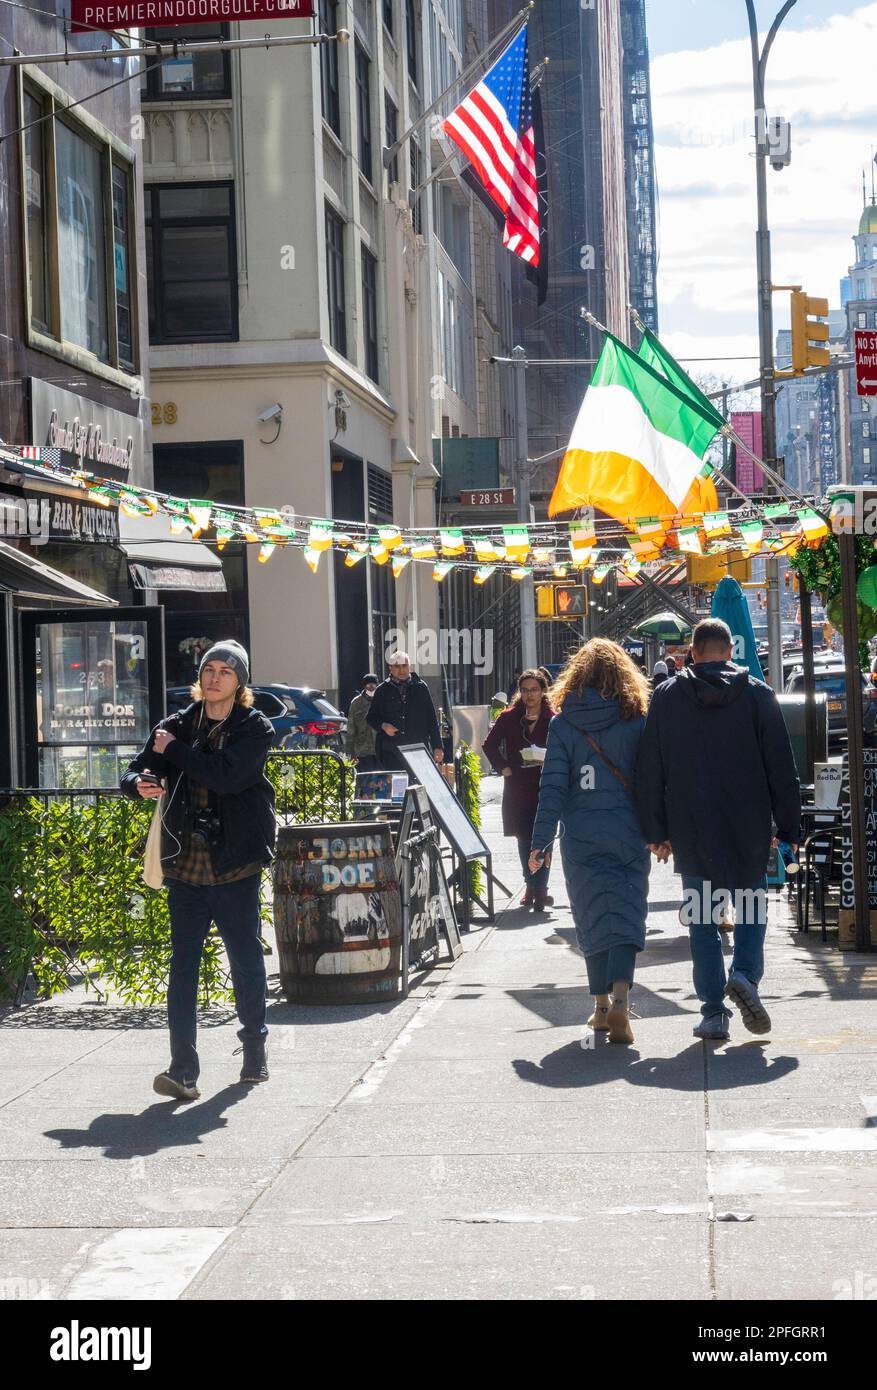 The John Doe, Irish pub on fifth Avenue decorated with Irish flags for the annual St. Patrick's Day celebrations, 2023, New York City, USA Stock Photo